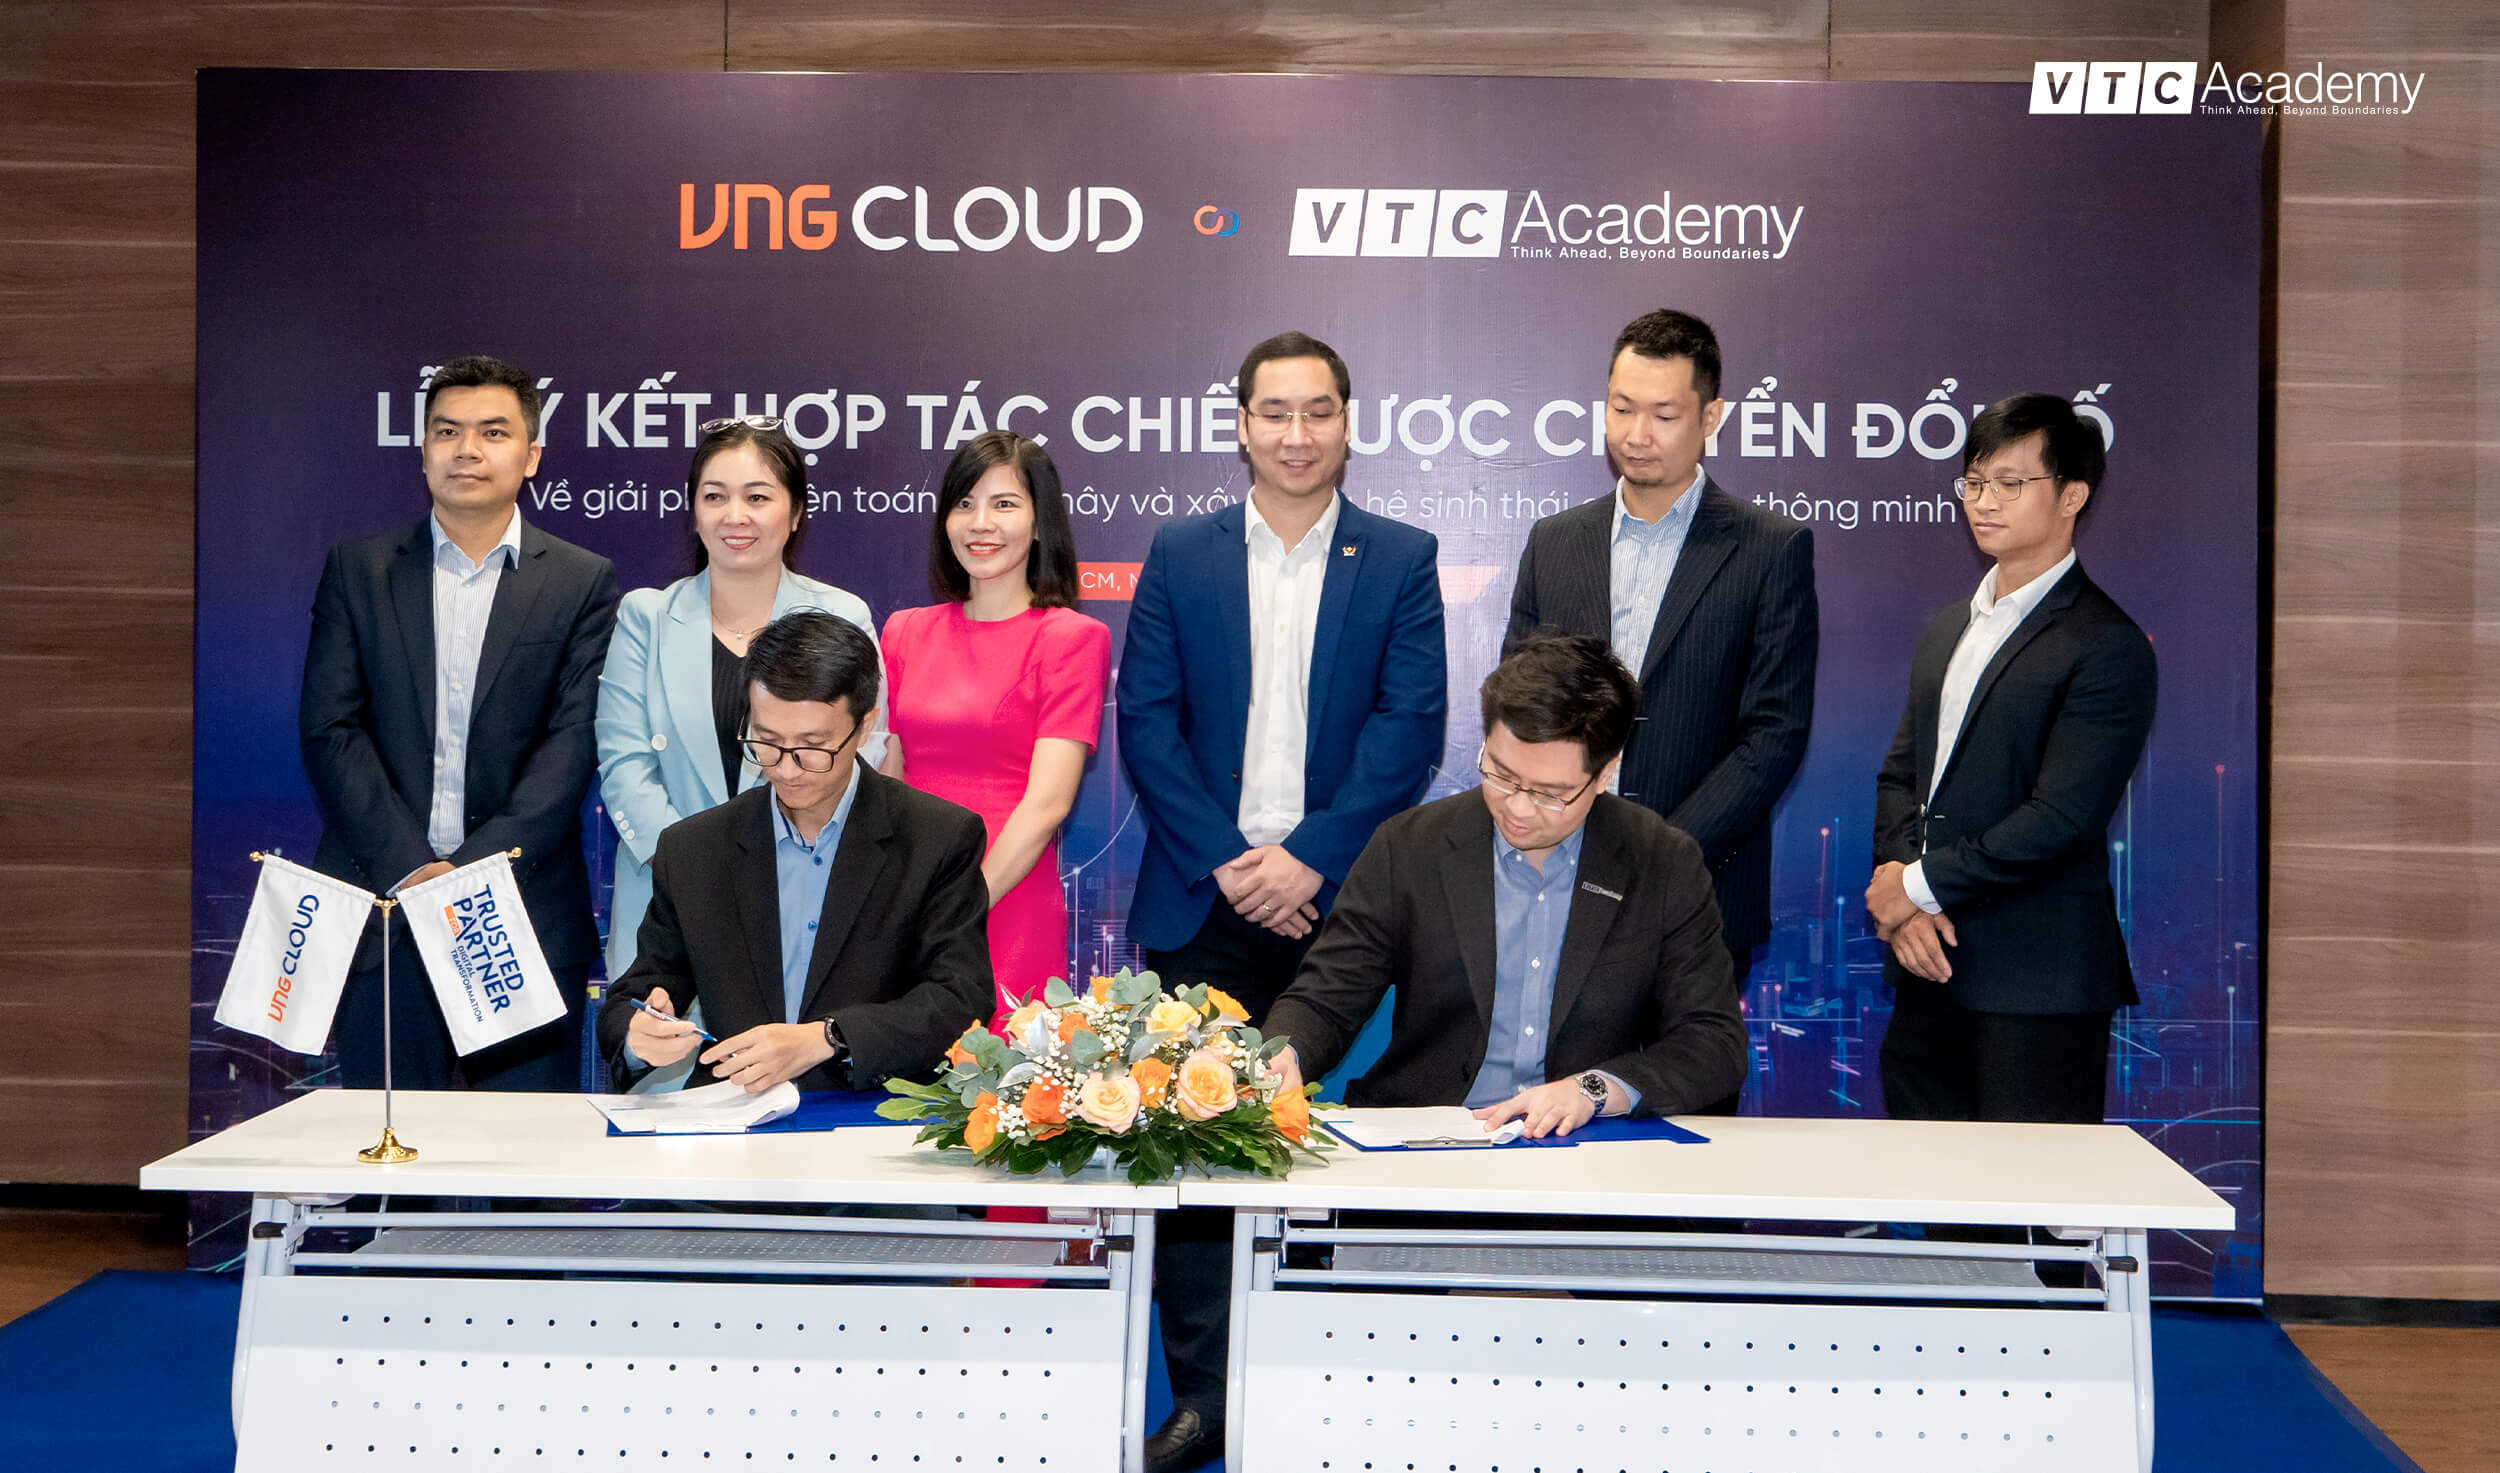 Mr. Hoang Anh (left) - CSMO of VNG Cloud and Mr. Hoang Viet Tan - Director of VTC Academy signed a cooperation agreement